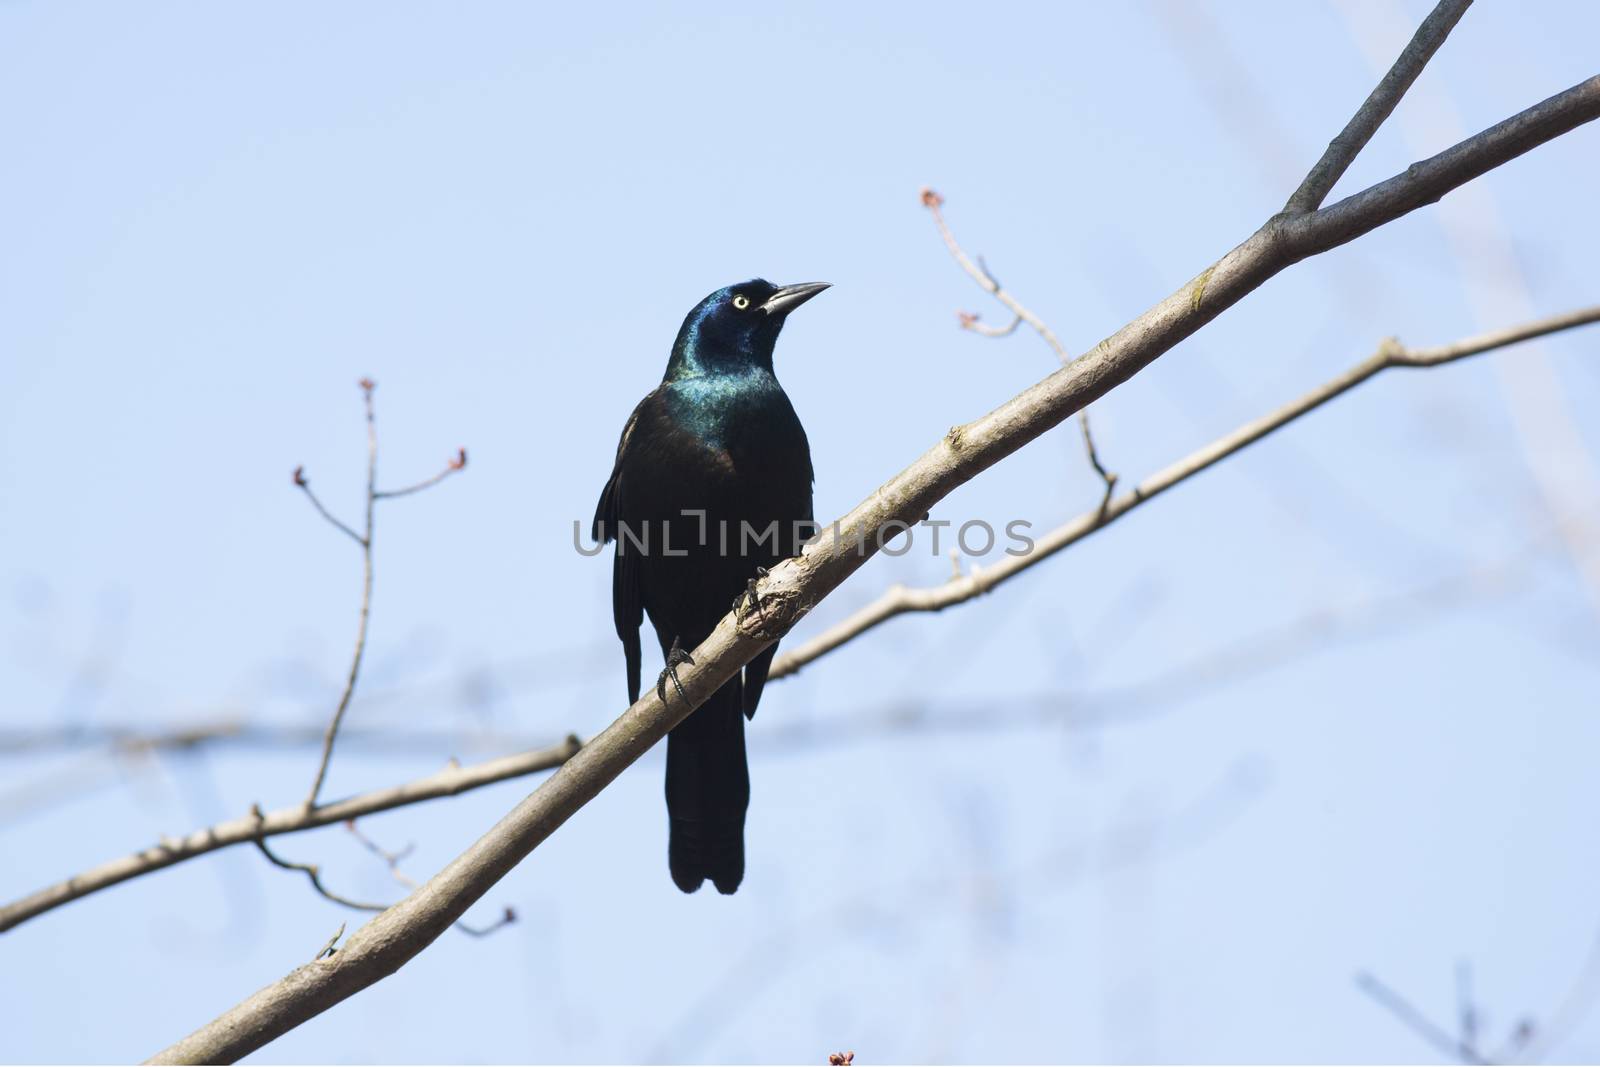 Common grackle bird by rgbspace